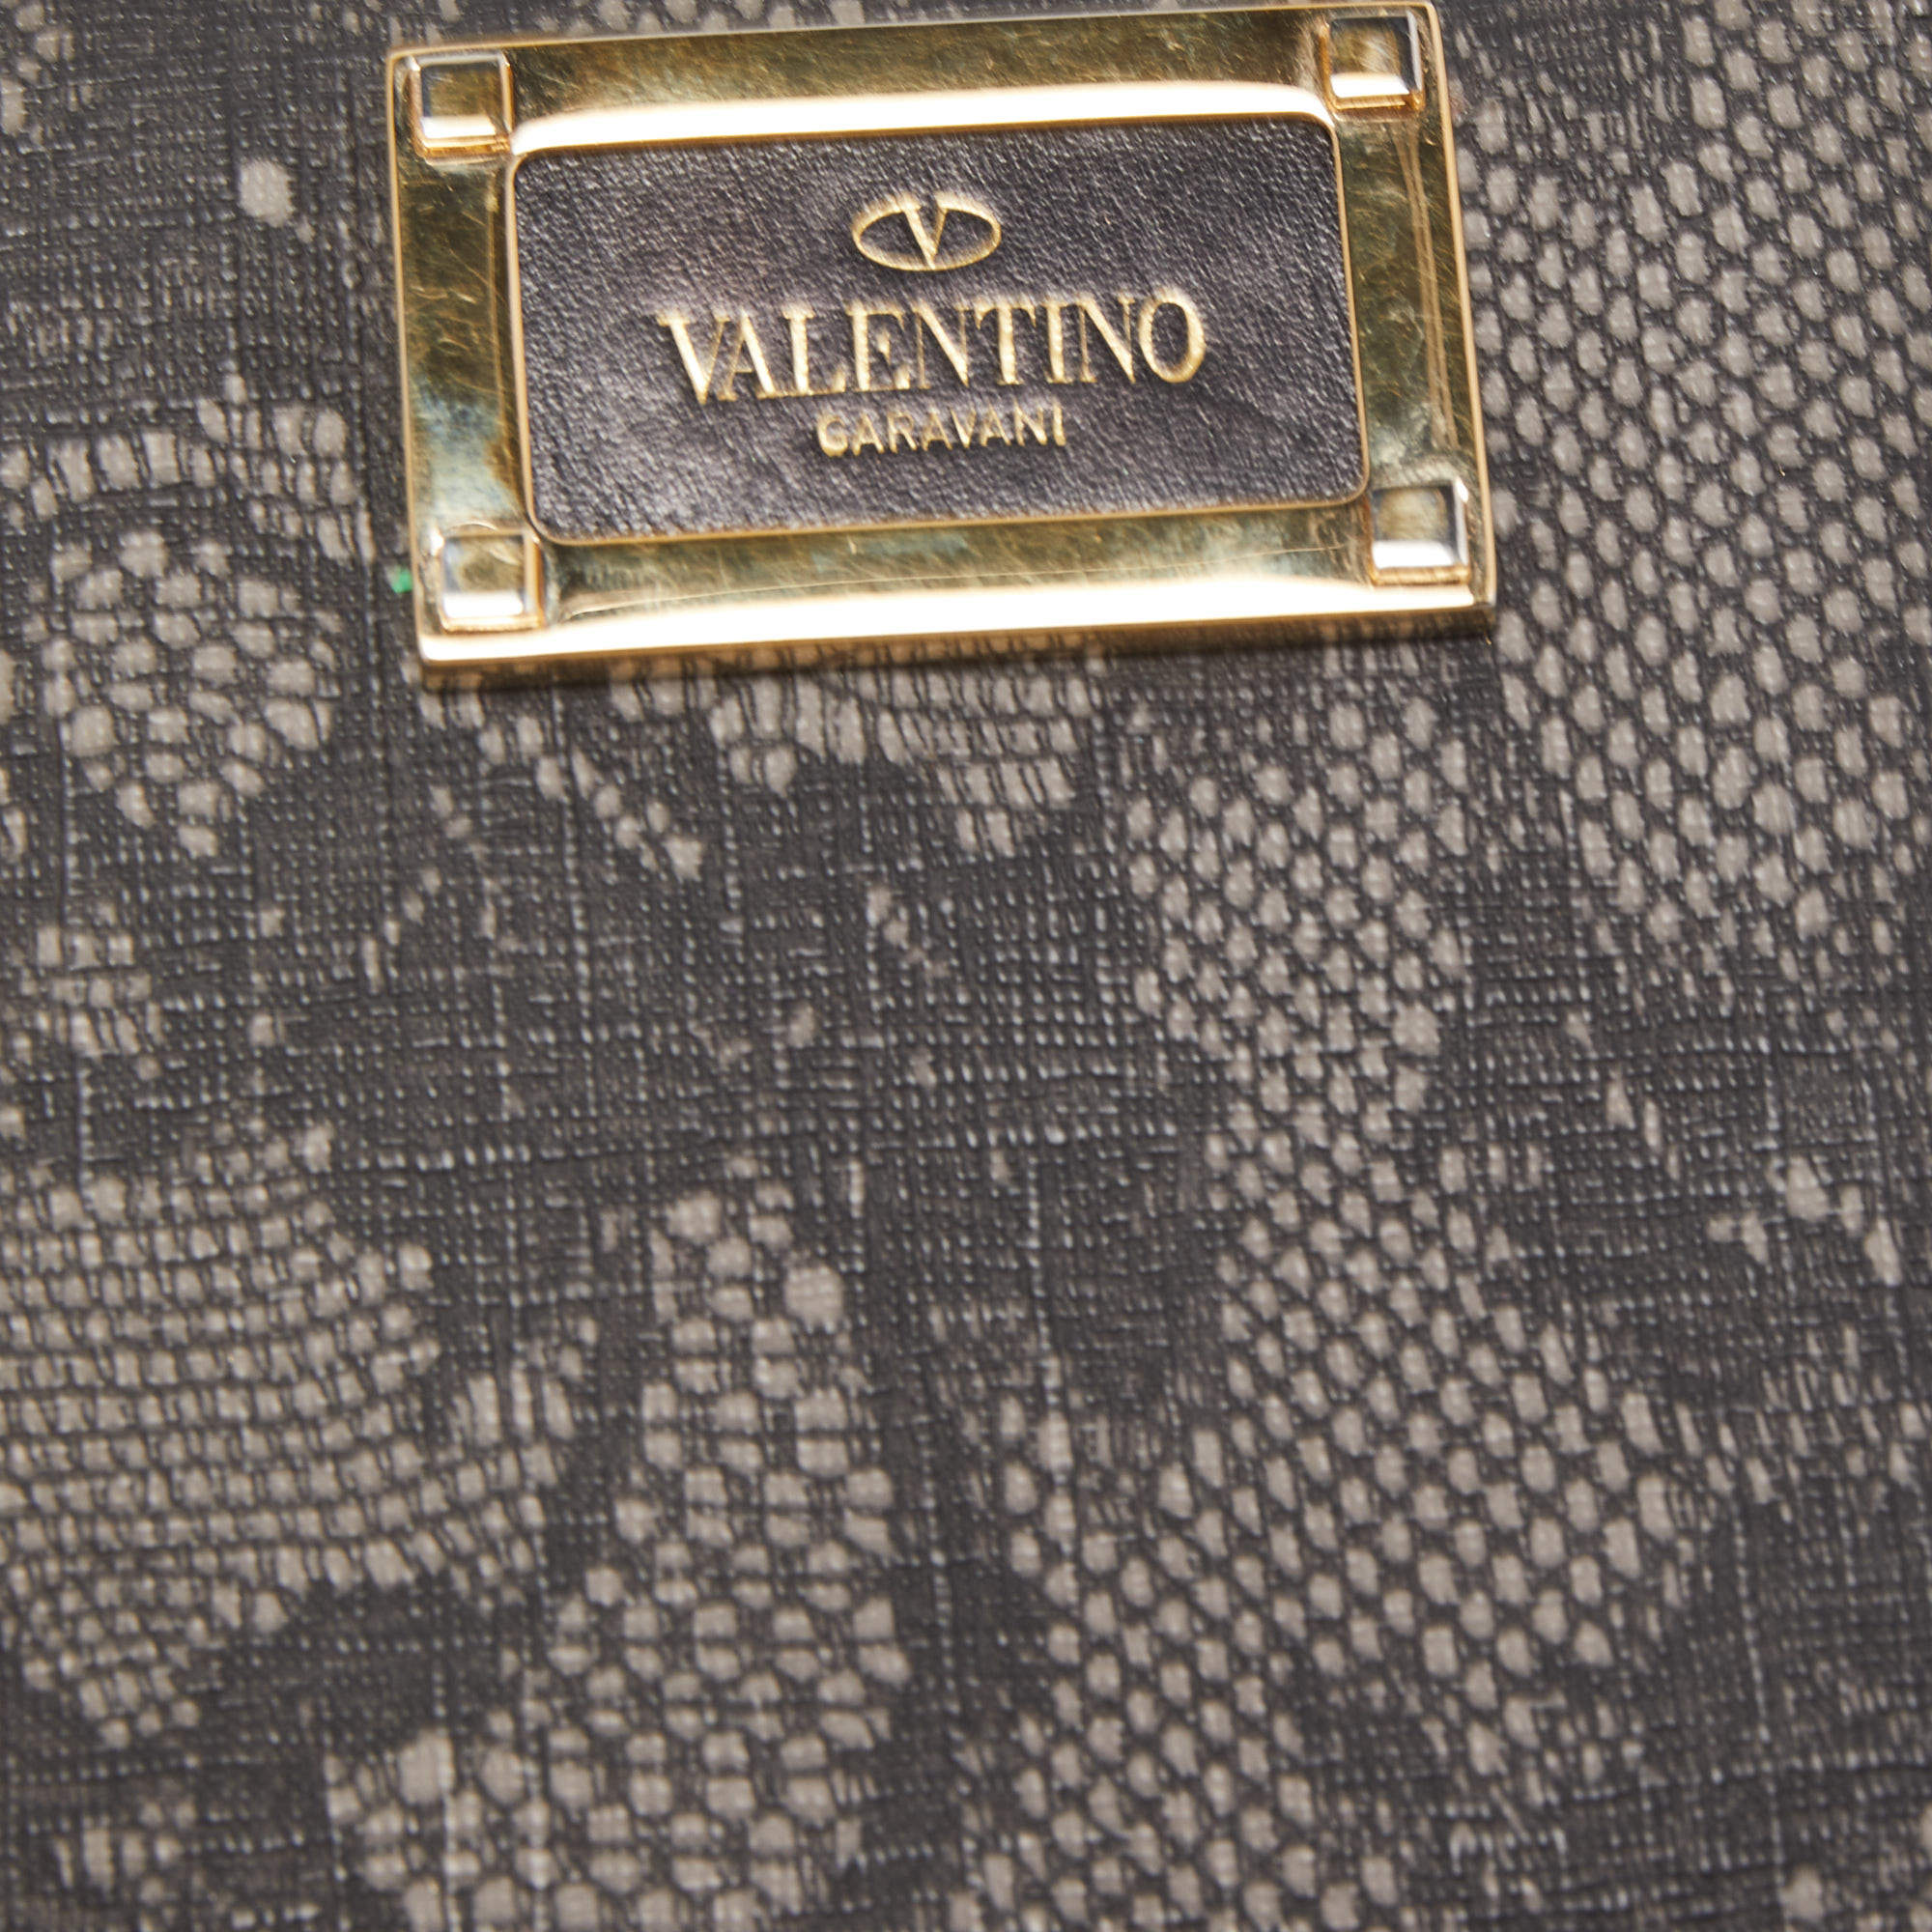 Valentino Black/Grey Lace Print Coated Canvas Zip Compact Wallet